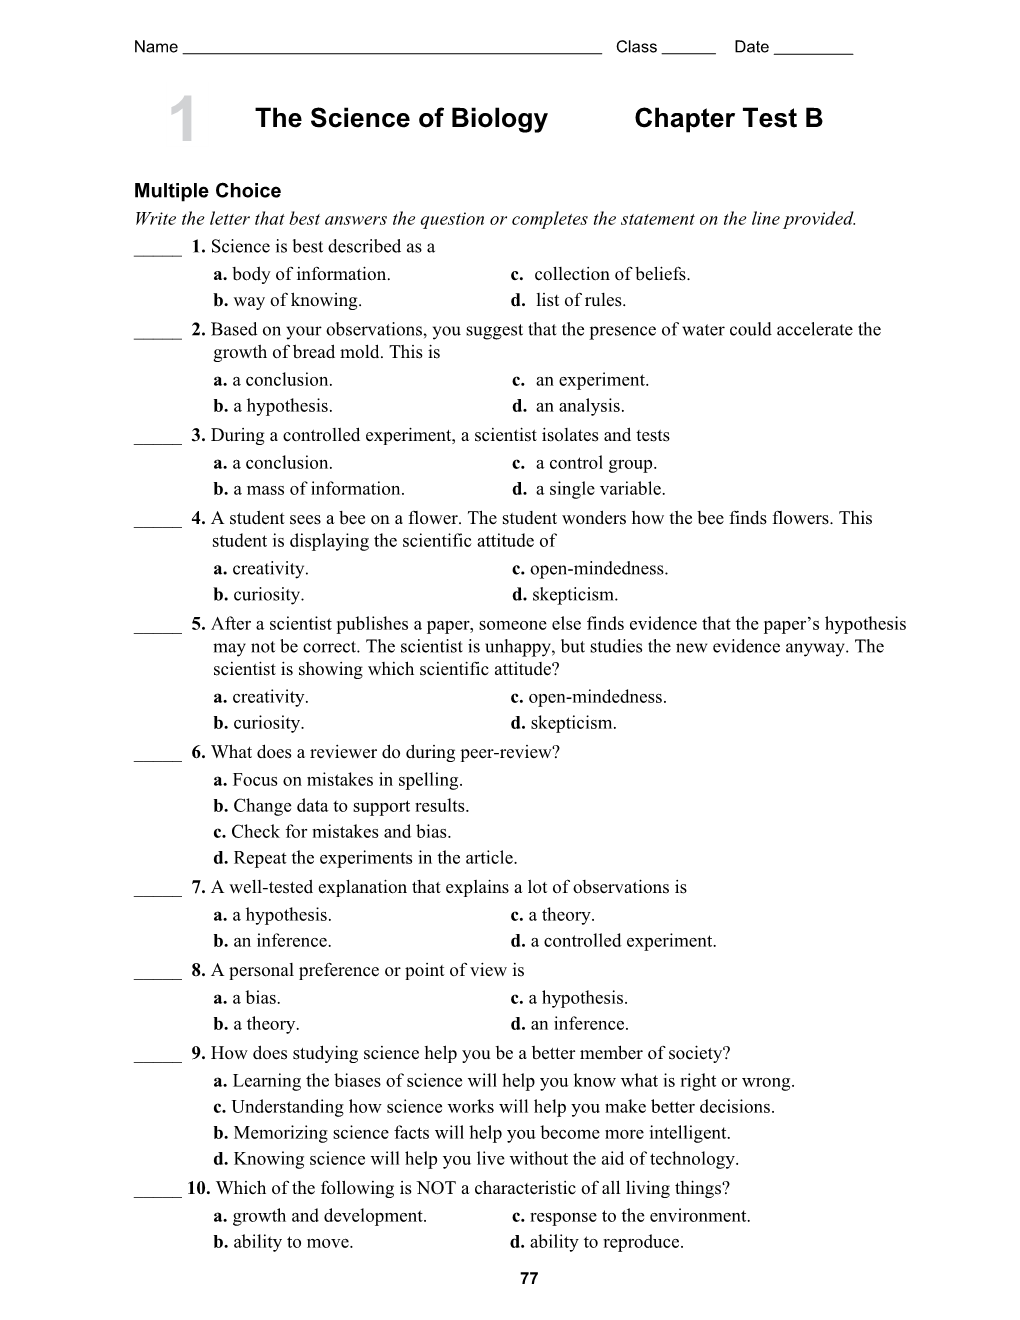 The Science of Biologychapter Test B